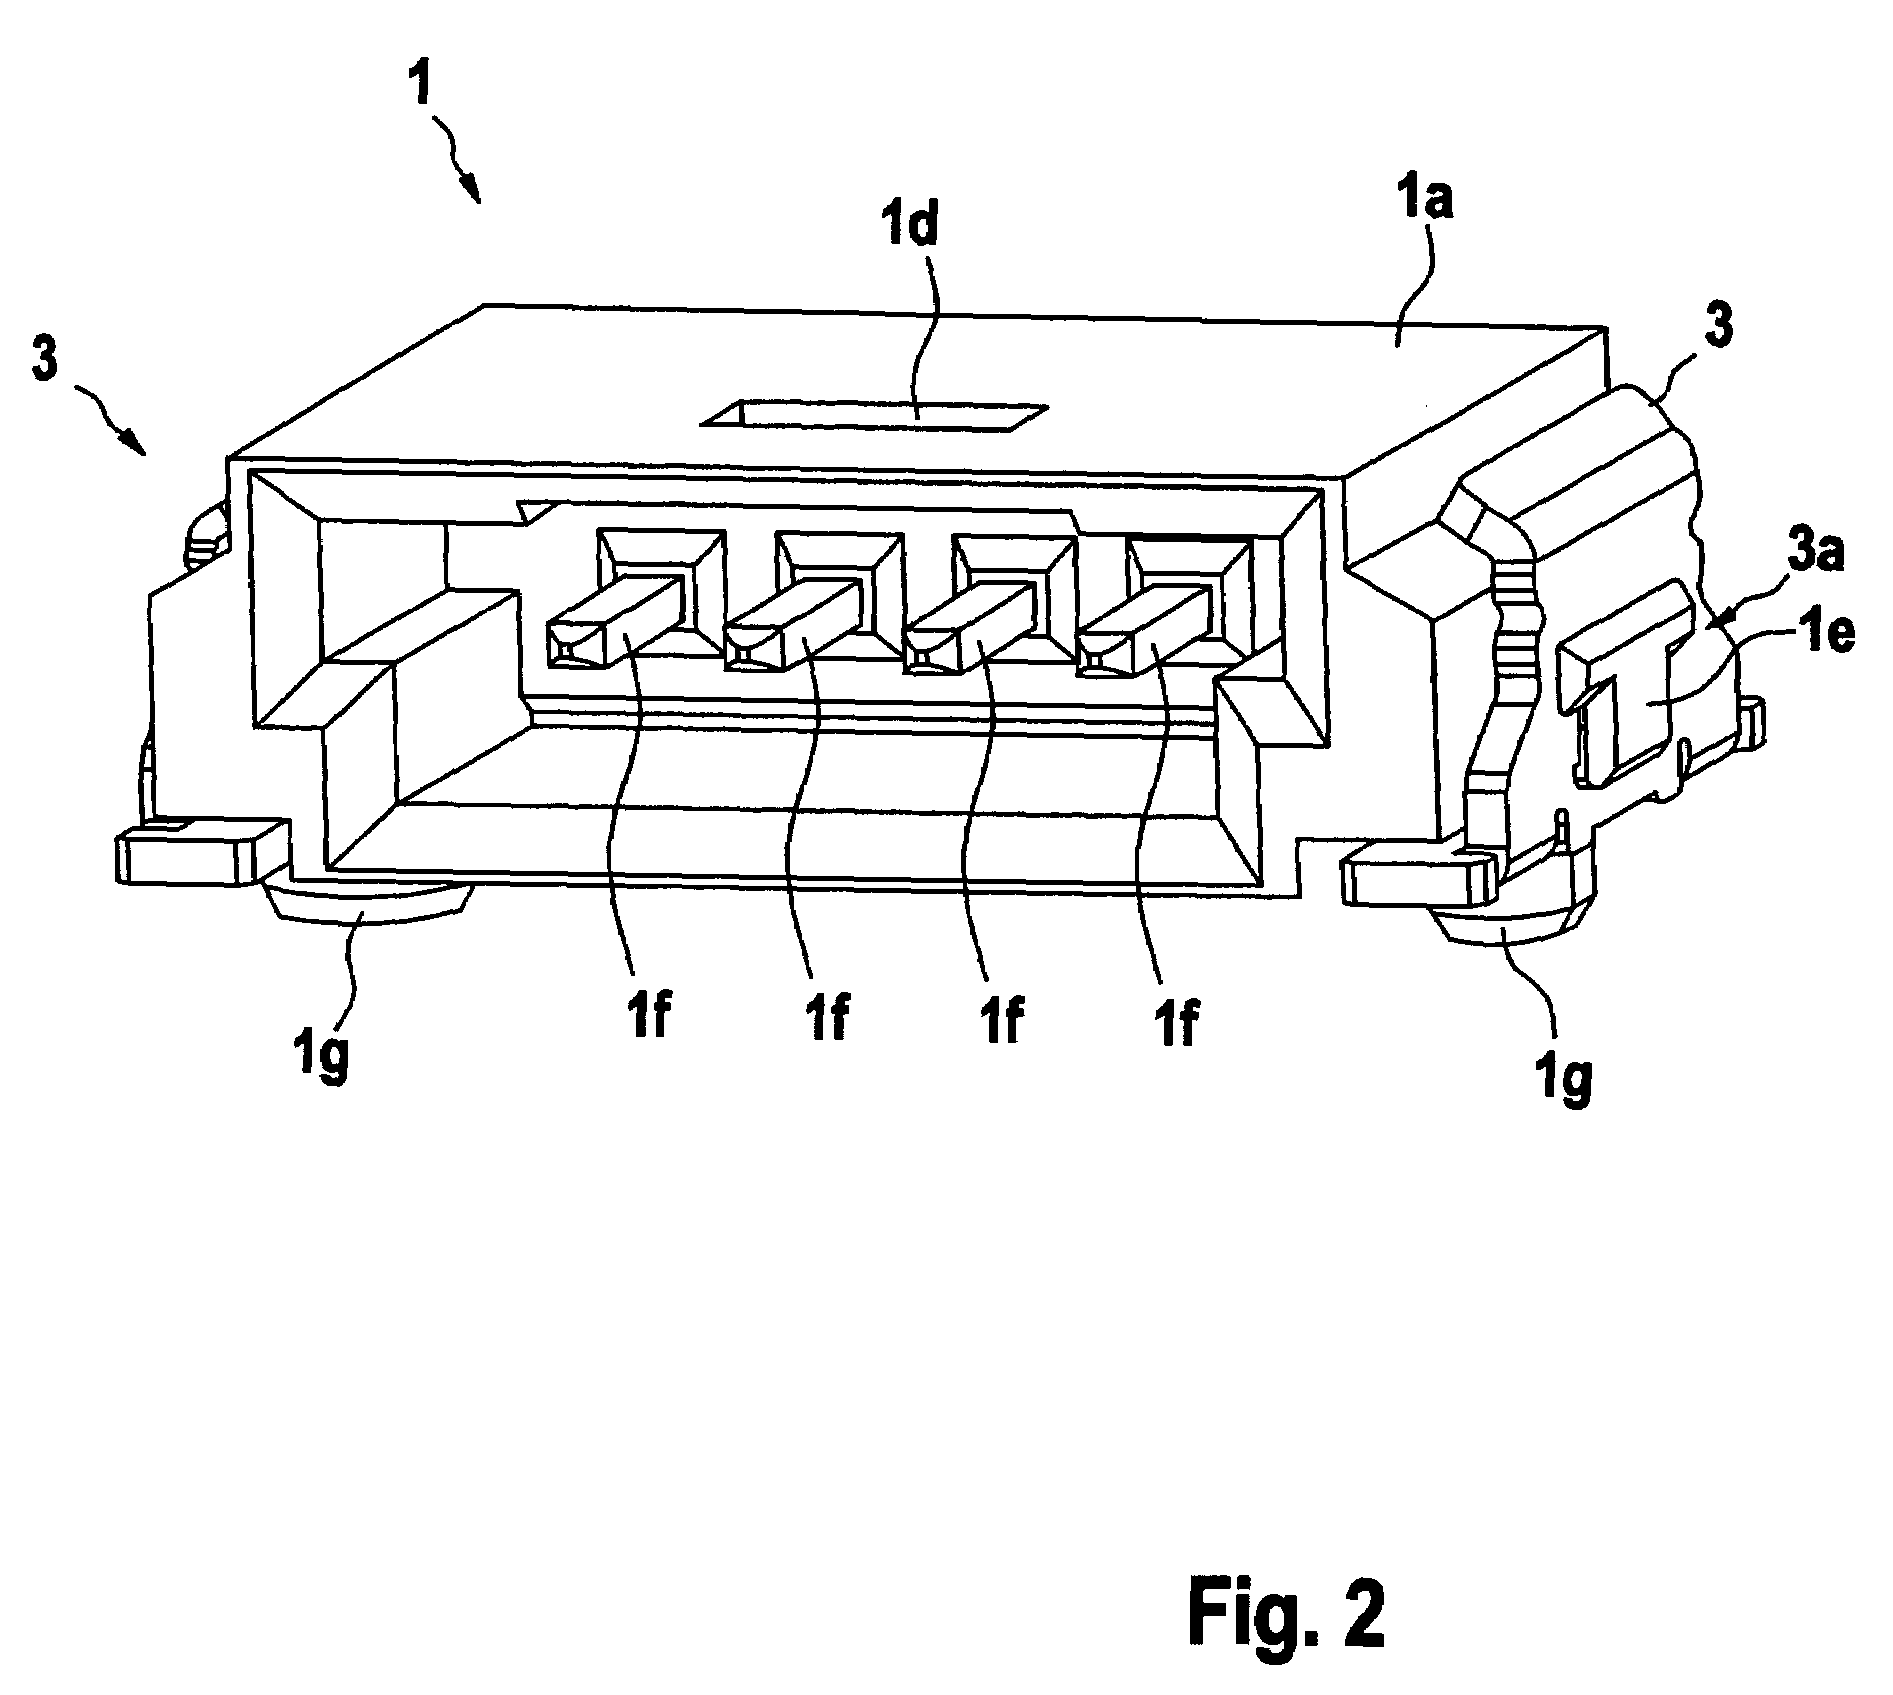 Insulation displacement multipoint connector for electrical plug connectors